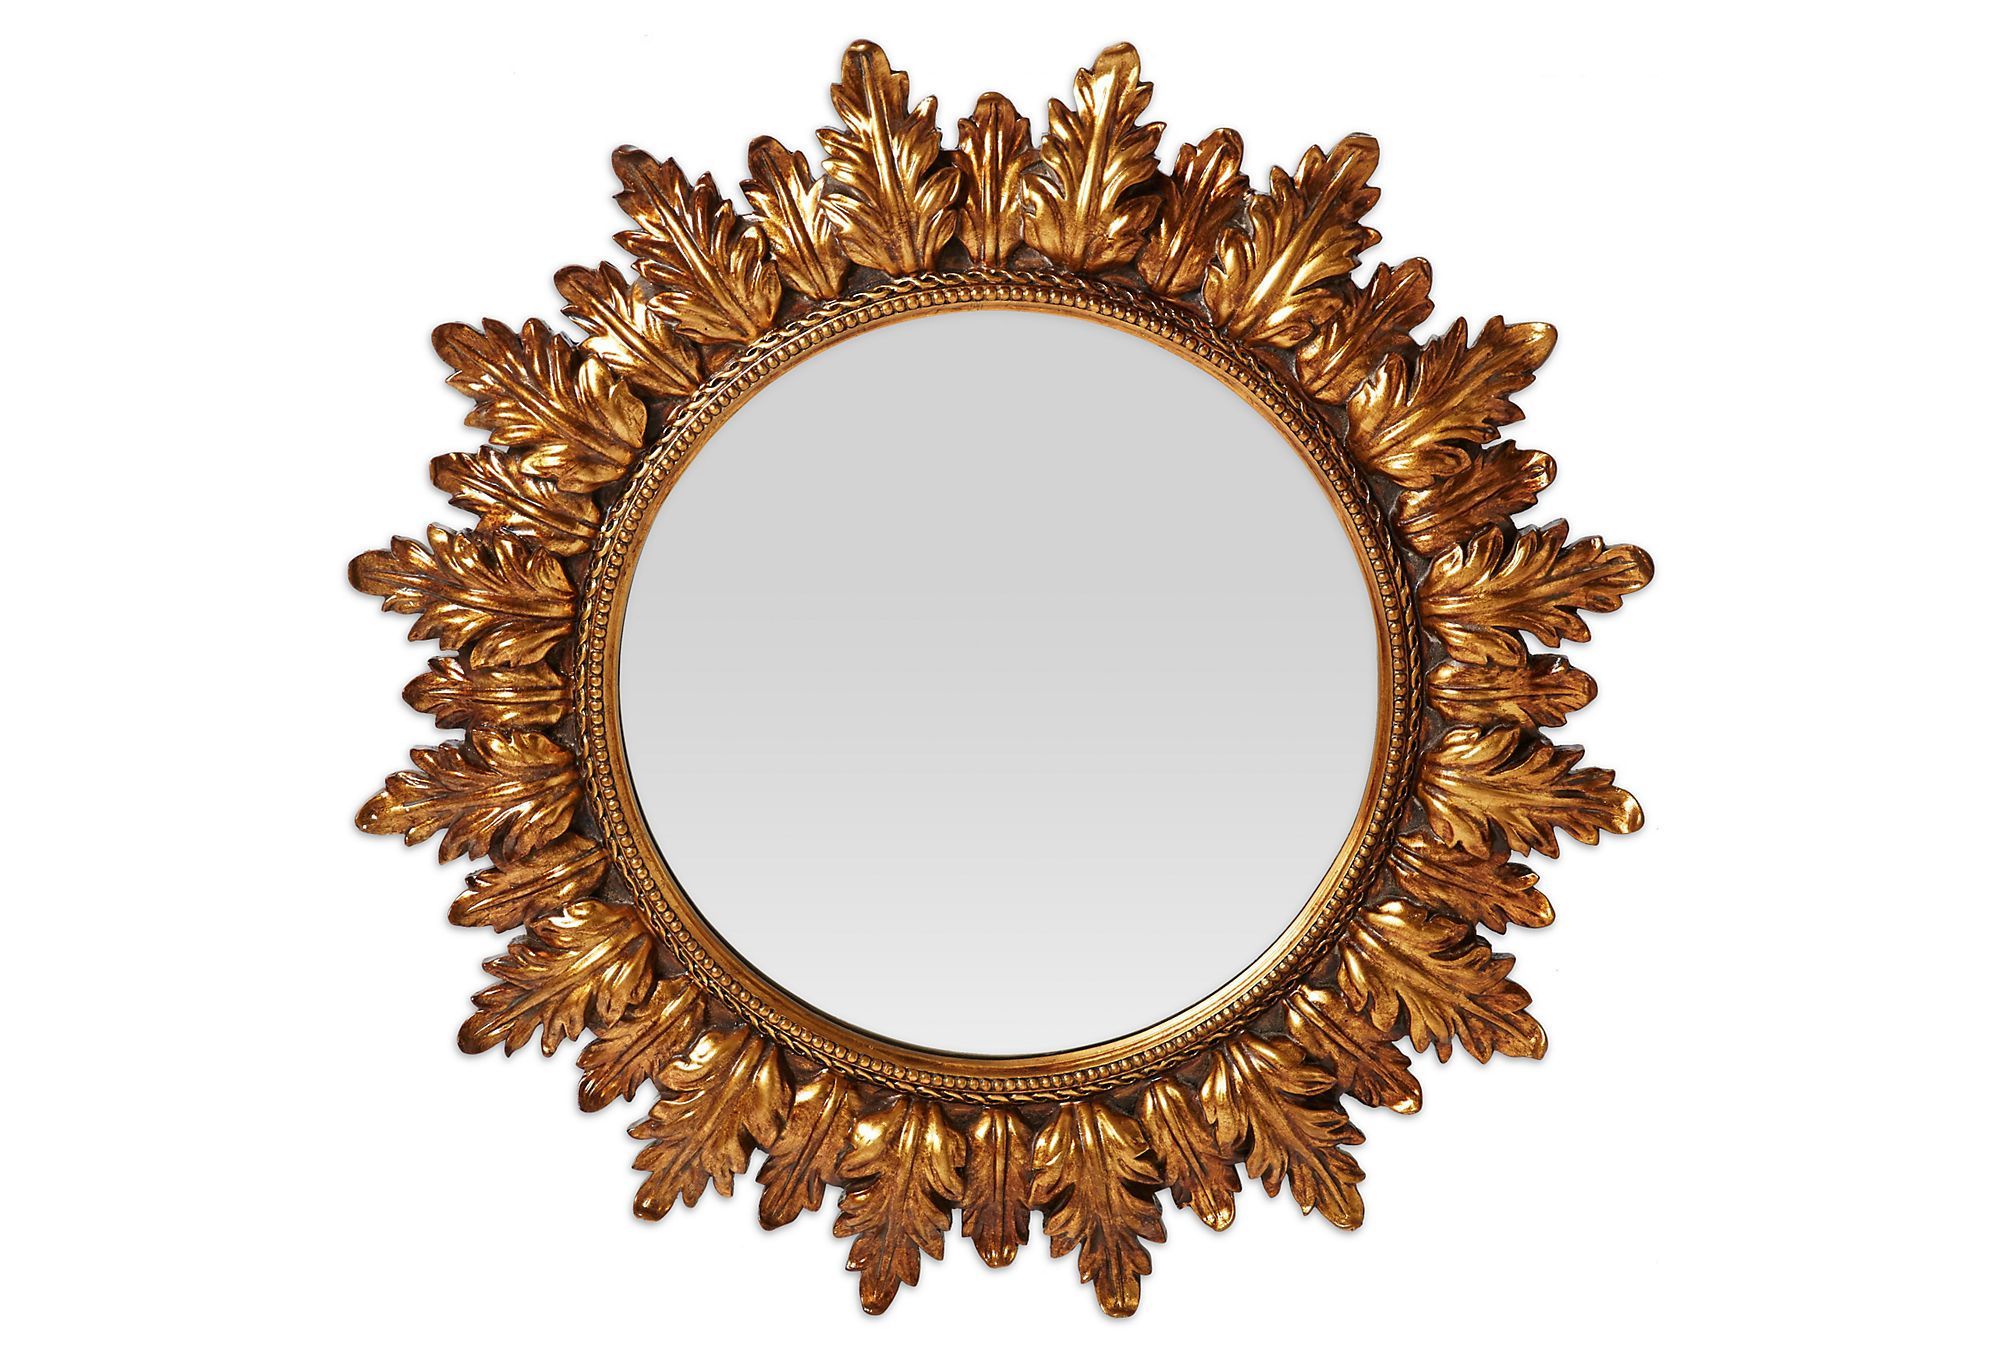 Ornate Sunburst Wall Mirror, Gold | Mirror Wall, Ornate Mirror, Wooden For Perillo Burst Wood Accent Mirrors (View 13 of 15)